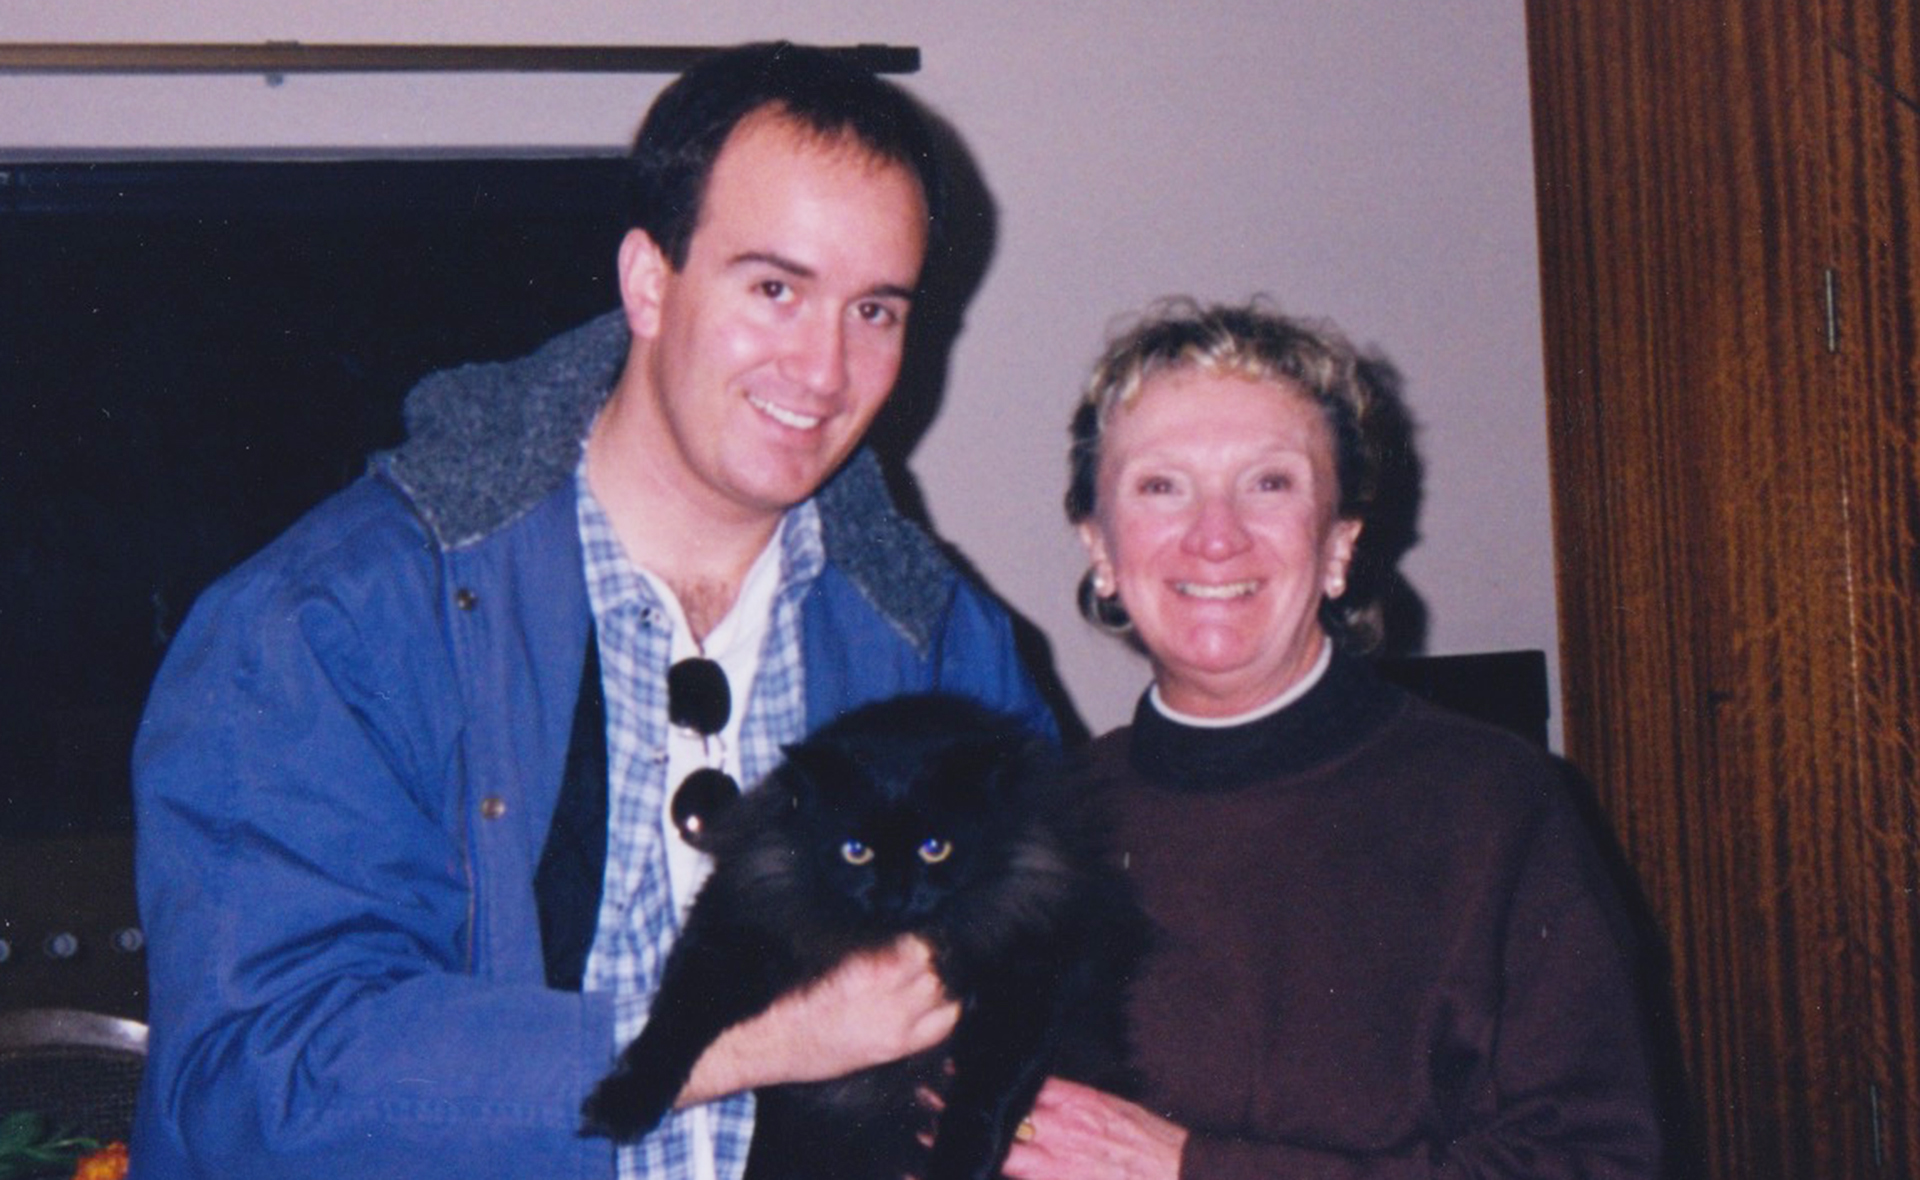 Remembering 9/11 after 20 years: Simon’s mother, Yvonne, was on holiday when her plane was hijacked by terrorists